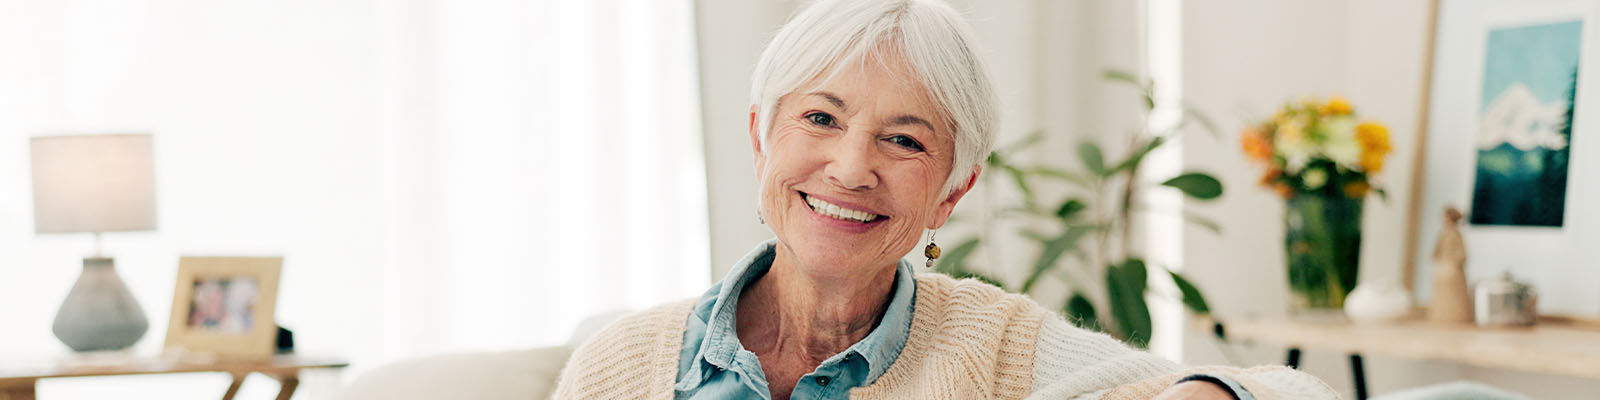 A senior woman with white hair sitting on the couch smiling in her senior independent living residence